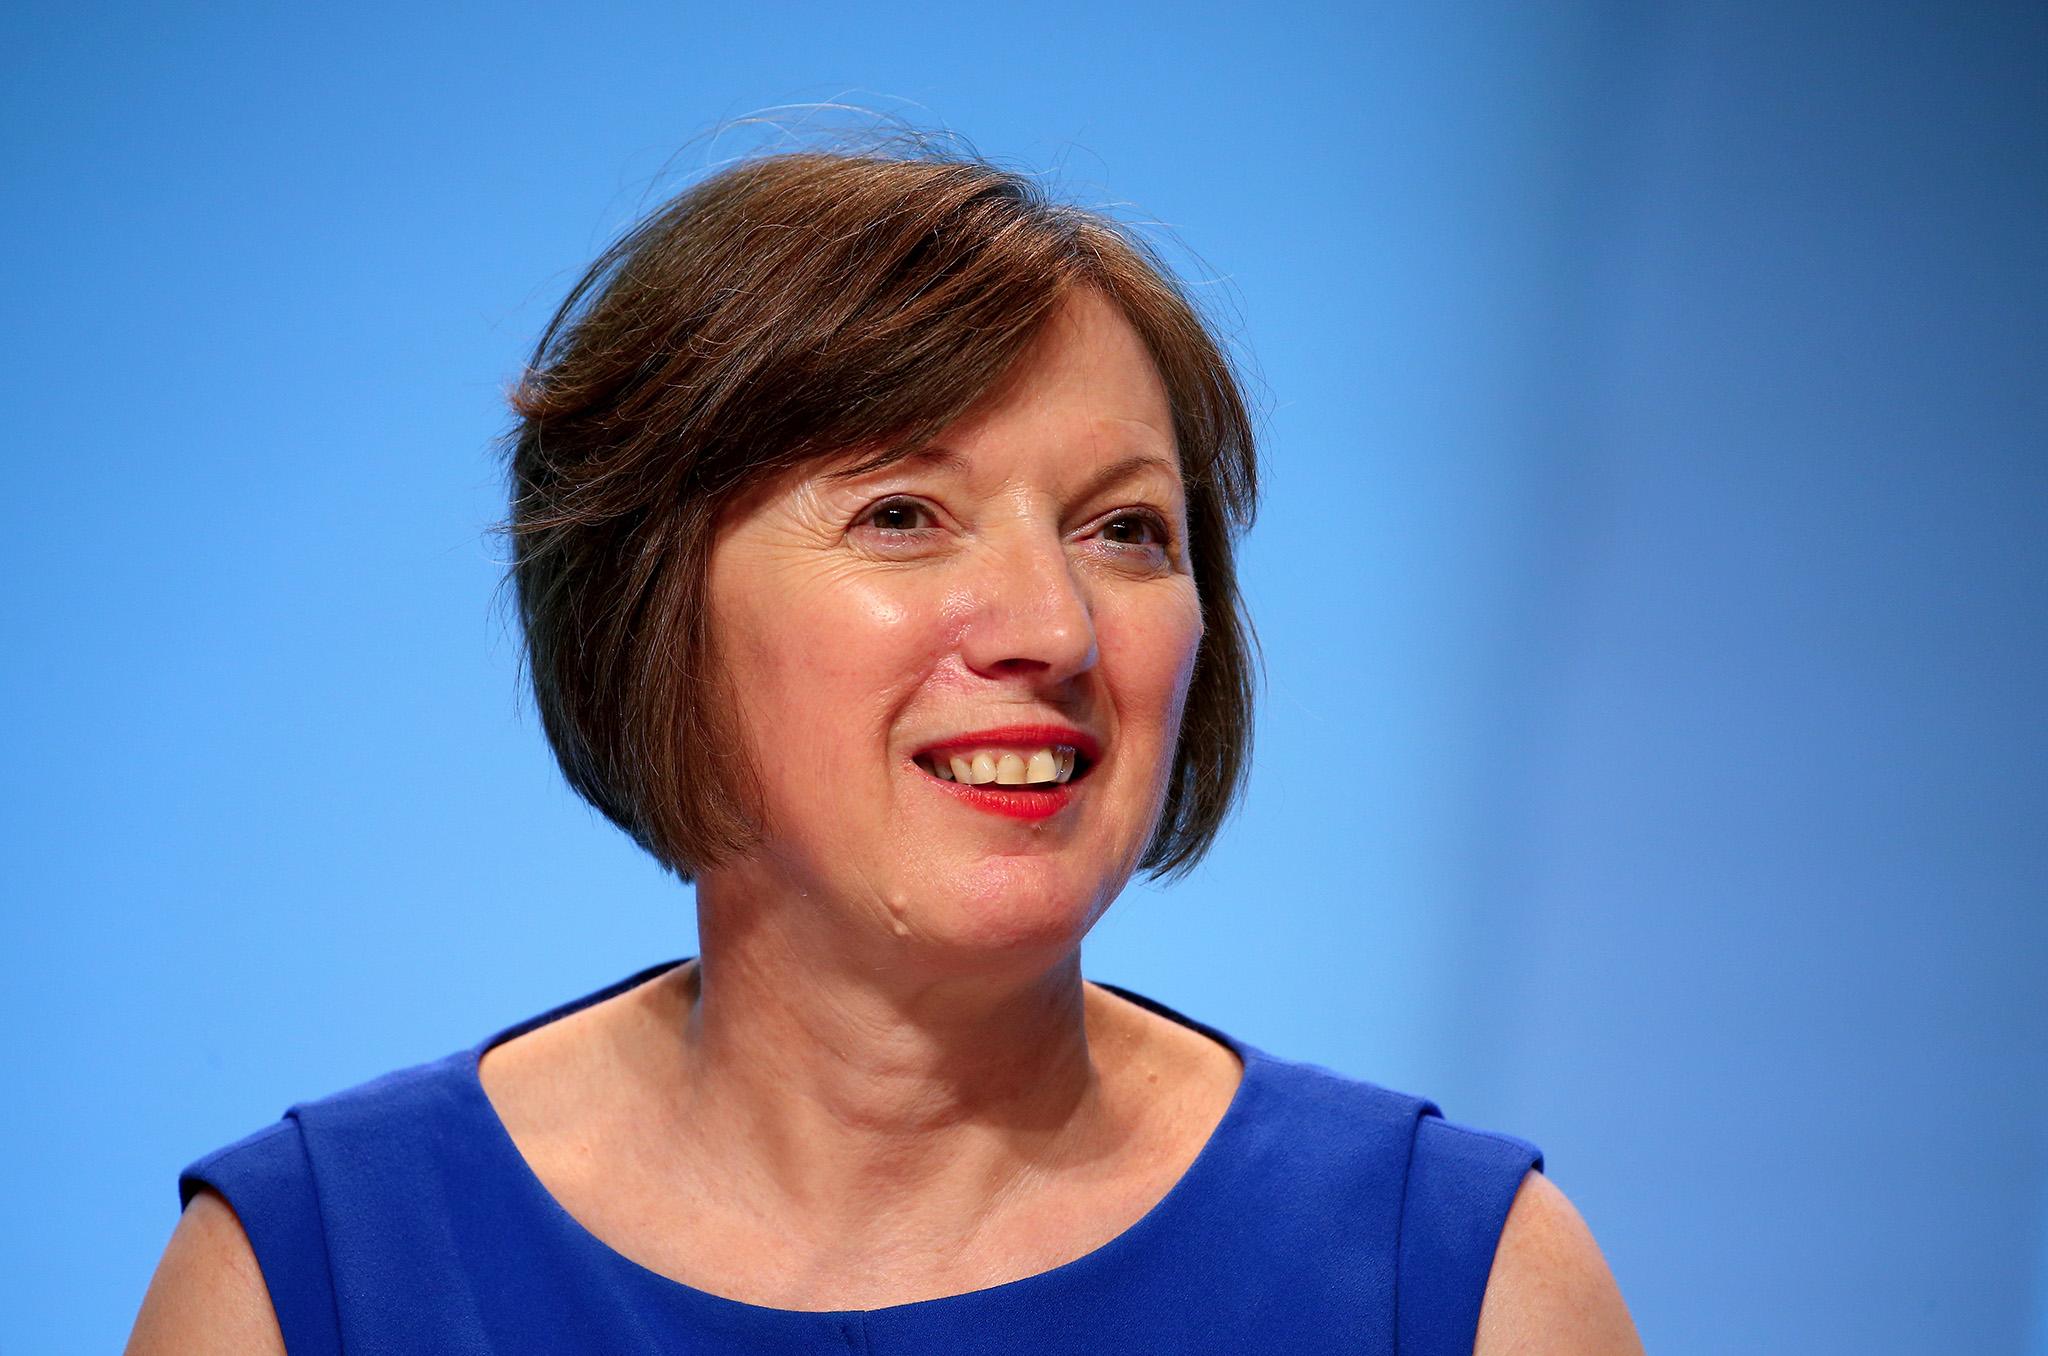 ‘Leading the TUC has been the greatest honour of my life,’ said Frances O’Grady